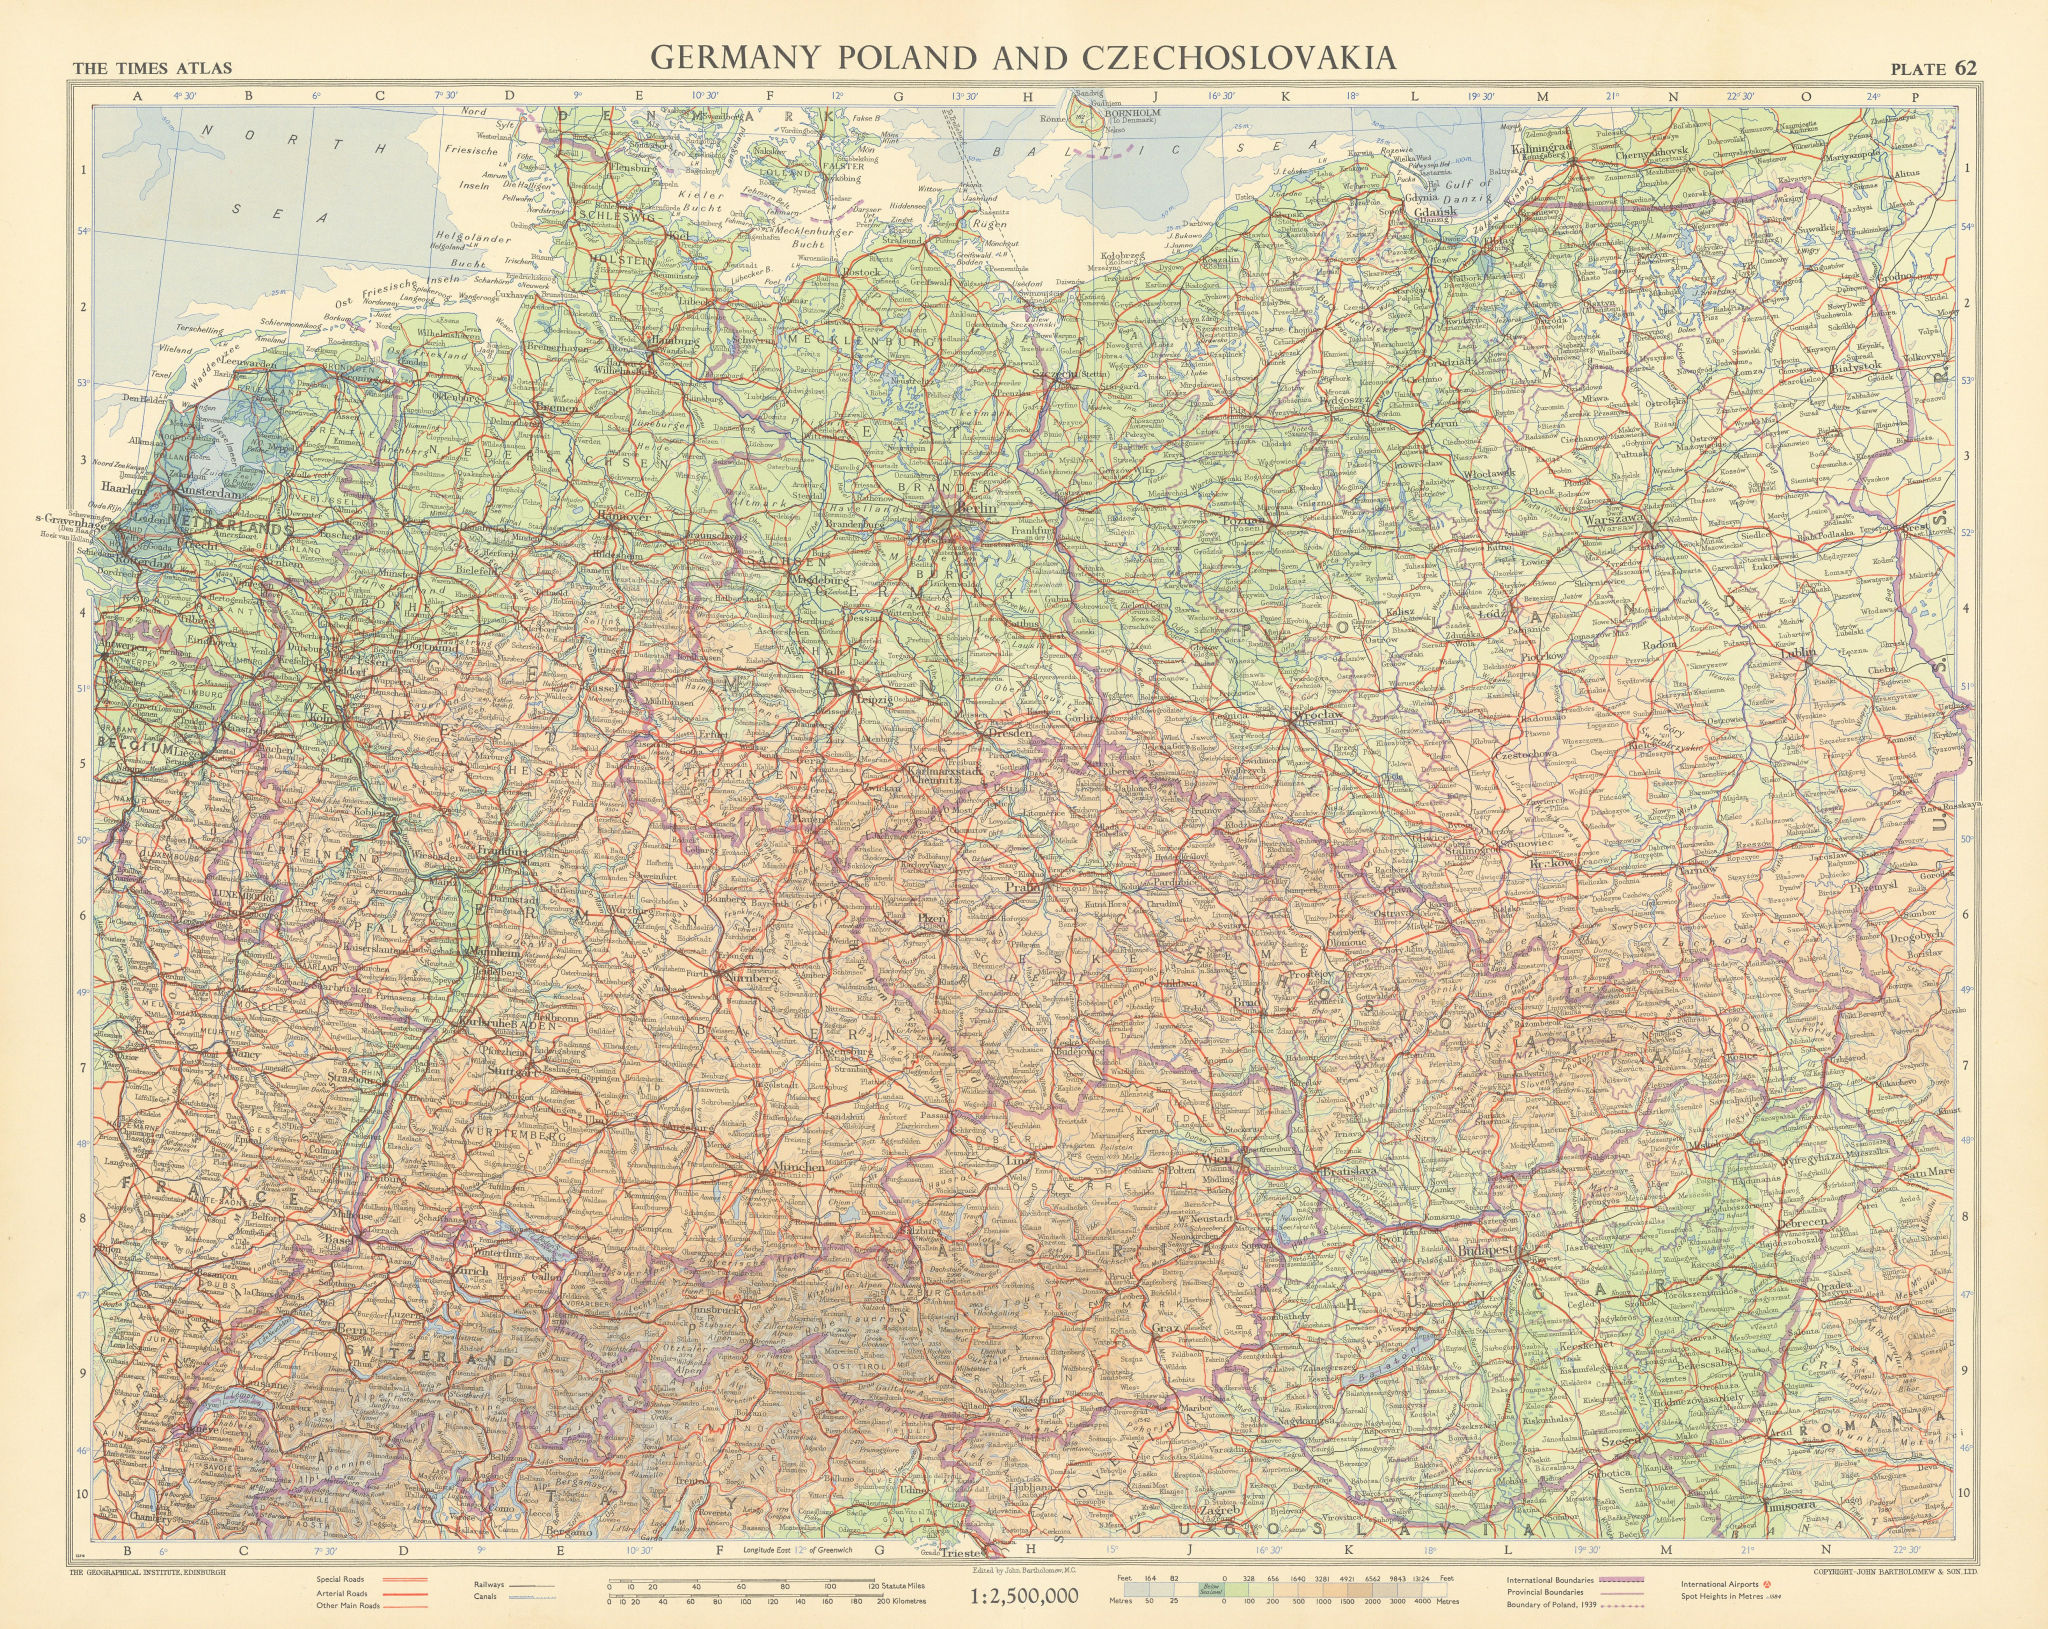 Associate Product Germany Poland Czechoslovakia. Central Europe. Pre-1939 borders. TIMES 1955 map